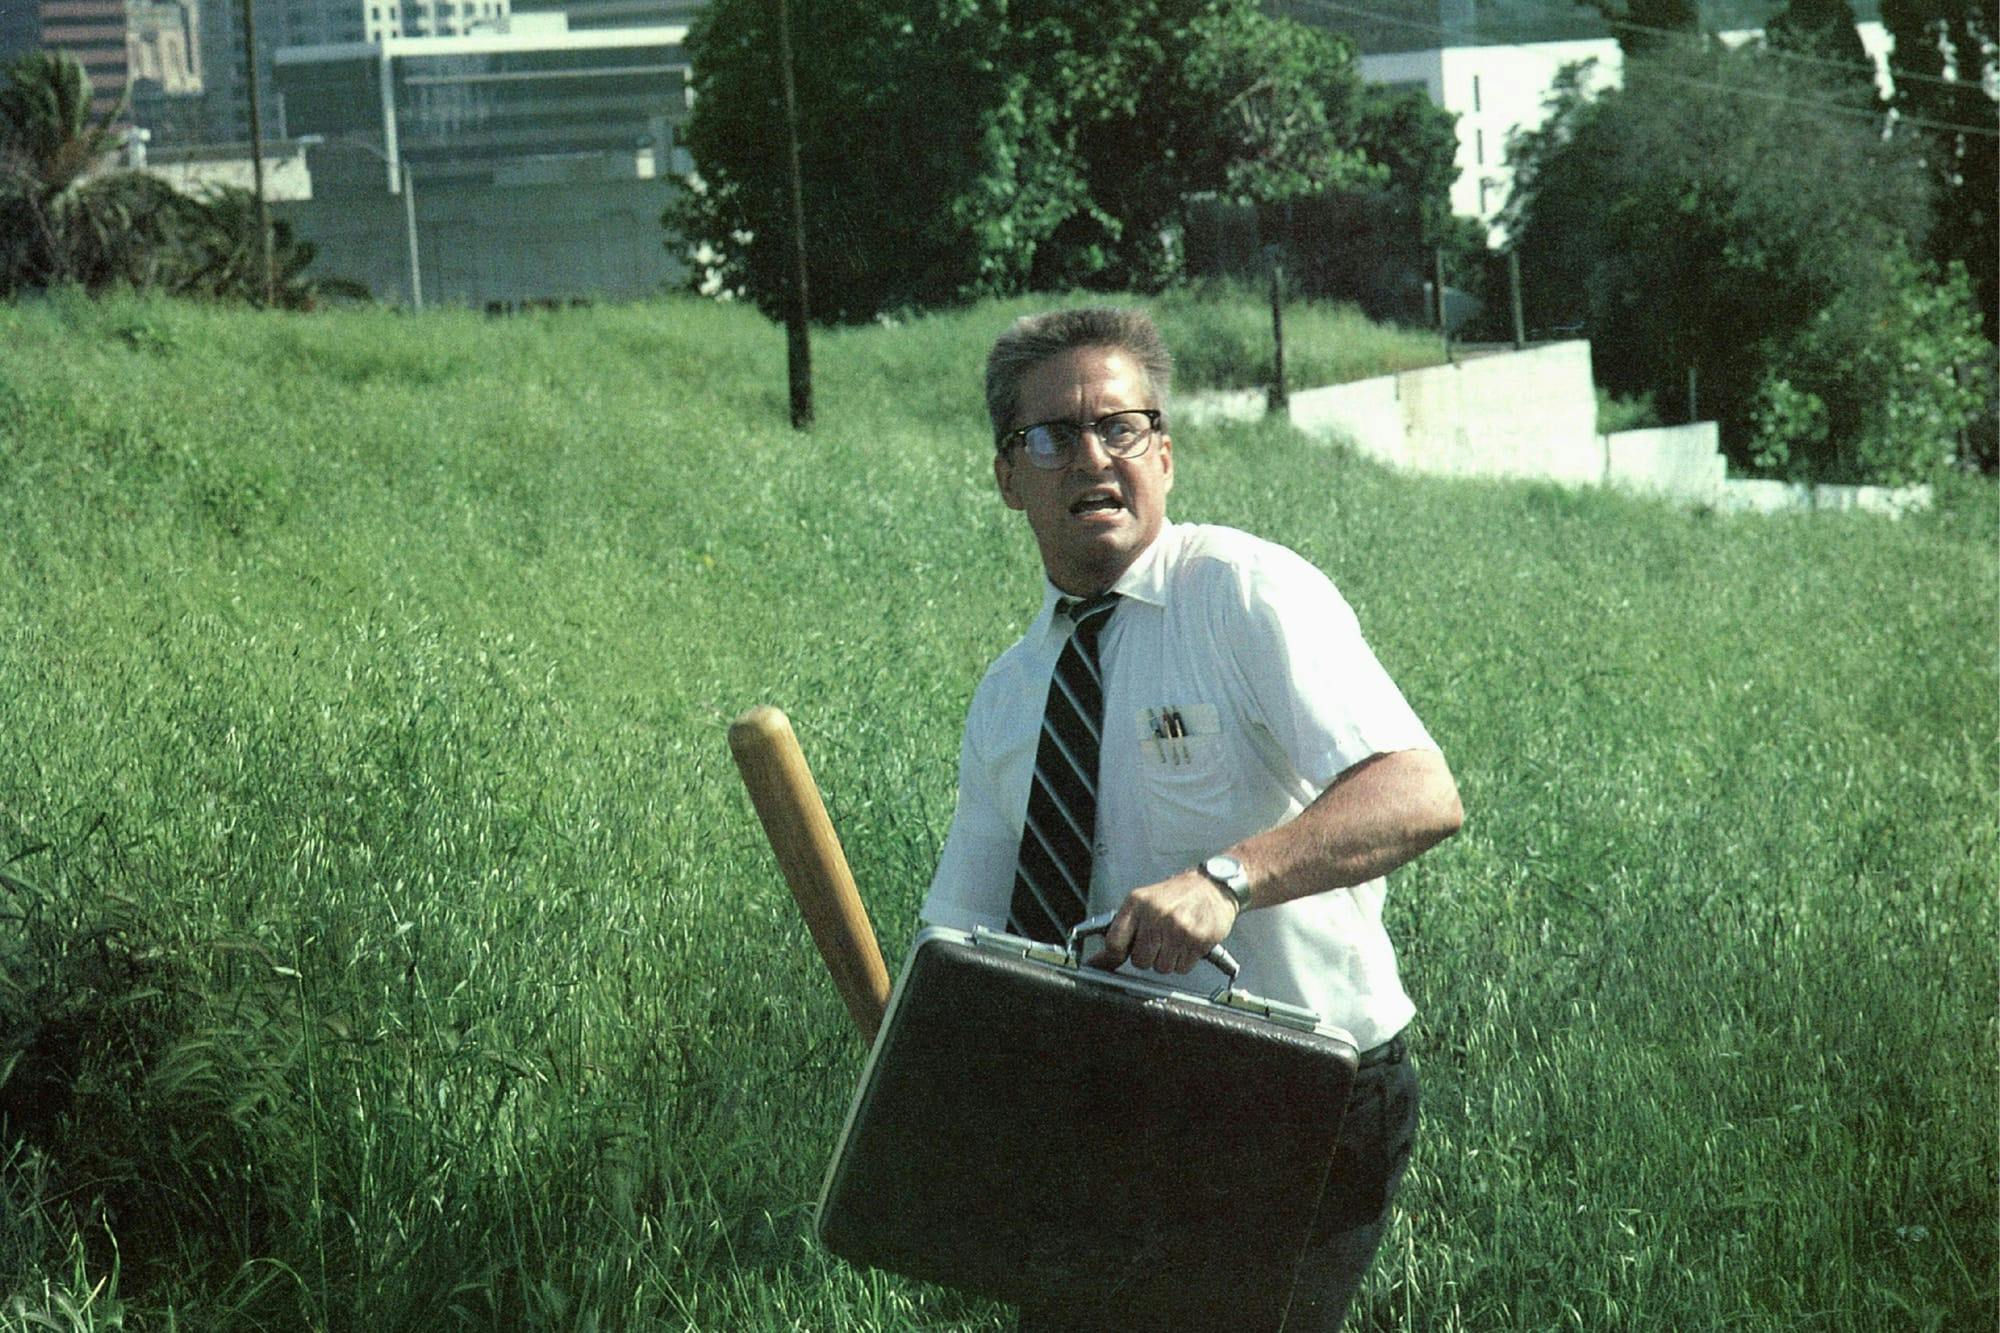 D-Fens (Michael Douglas) in Falling Down stands in a grassy field, holding a briefcase and a baseball bat.